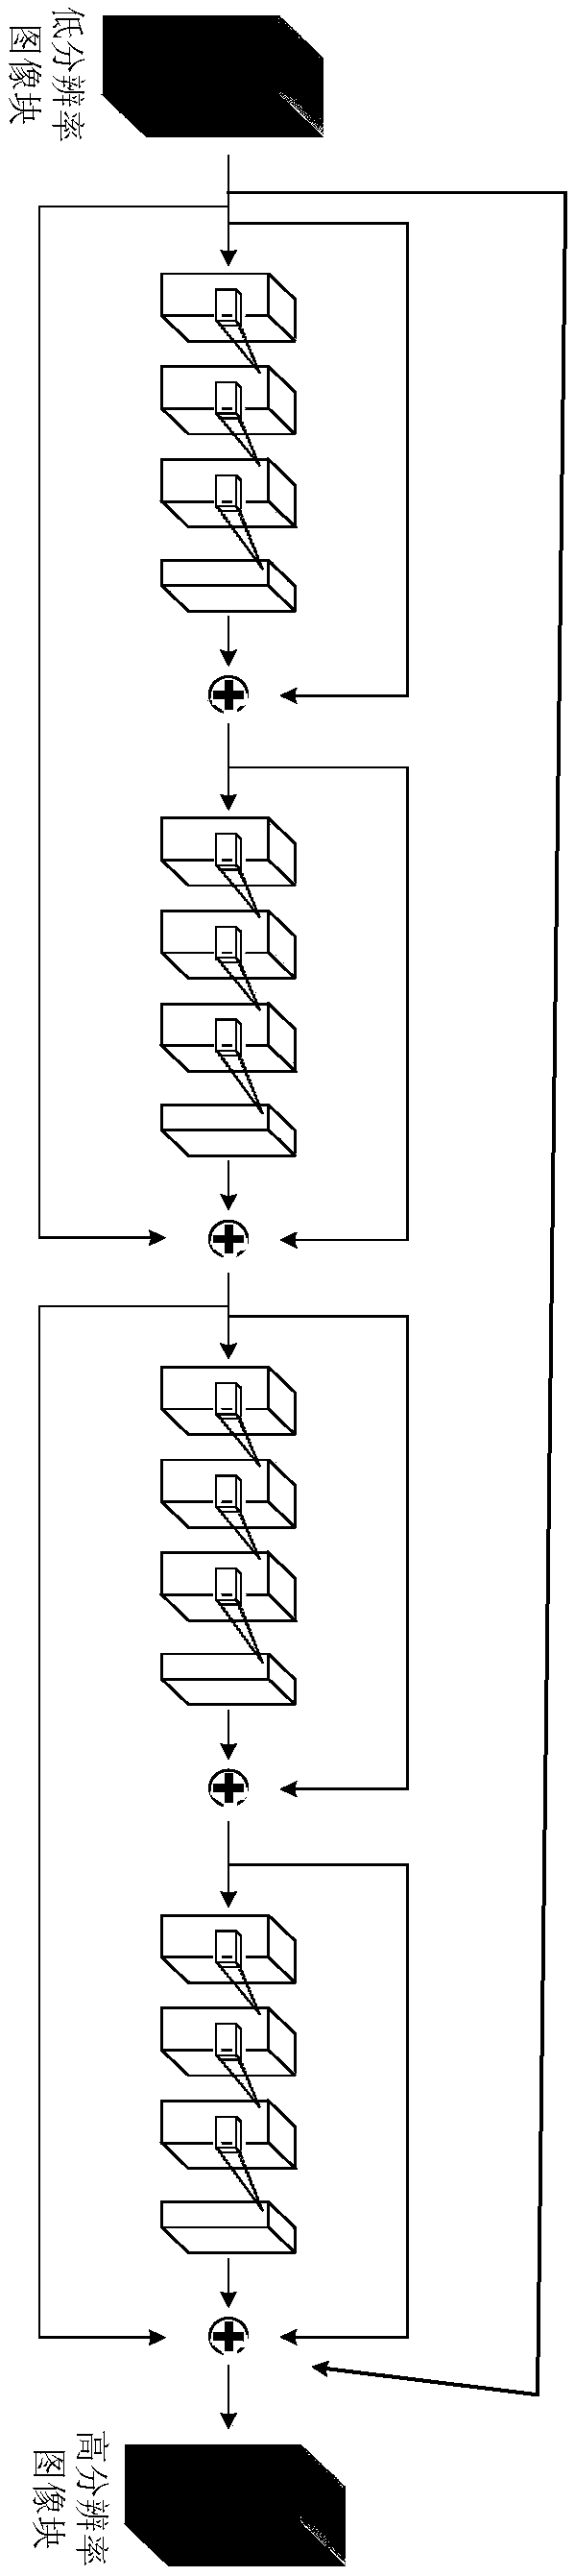 Hyperspectral image super-resolution reconstruction method and device based on depth residual network